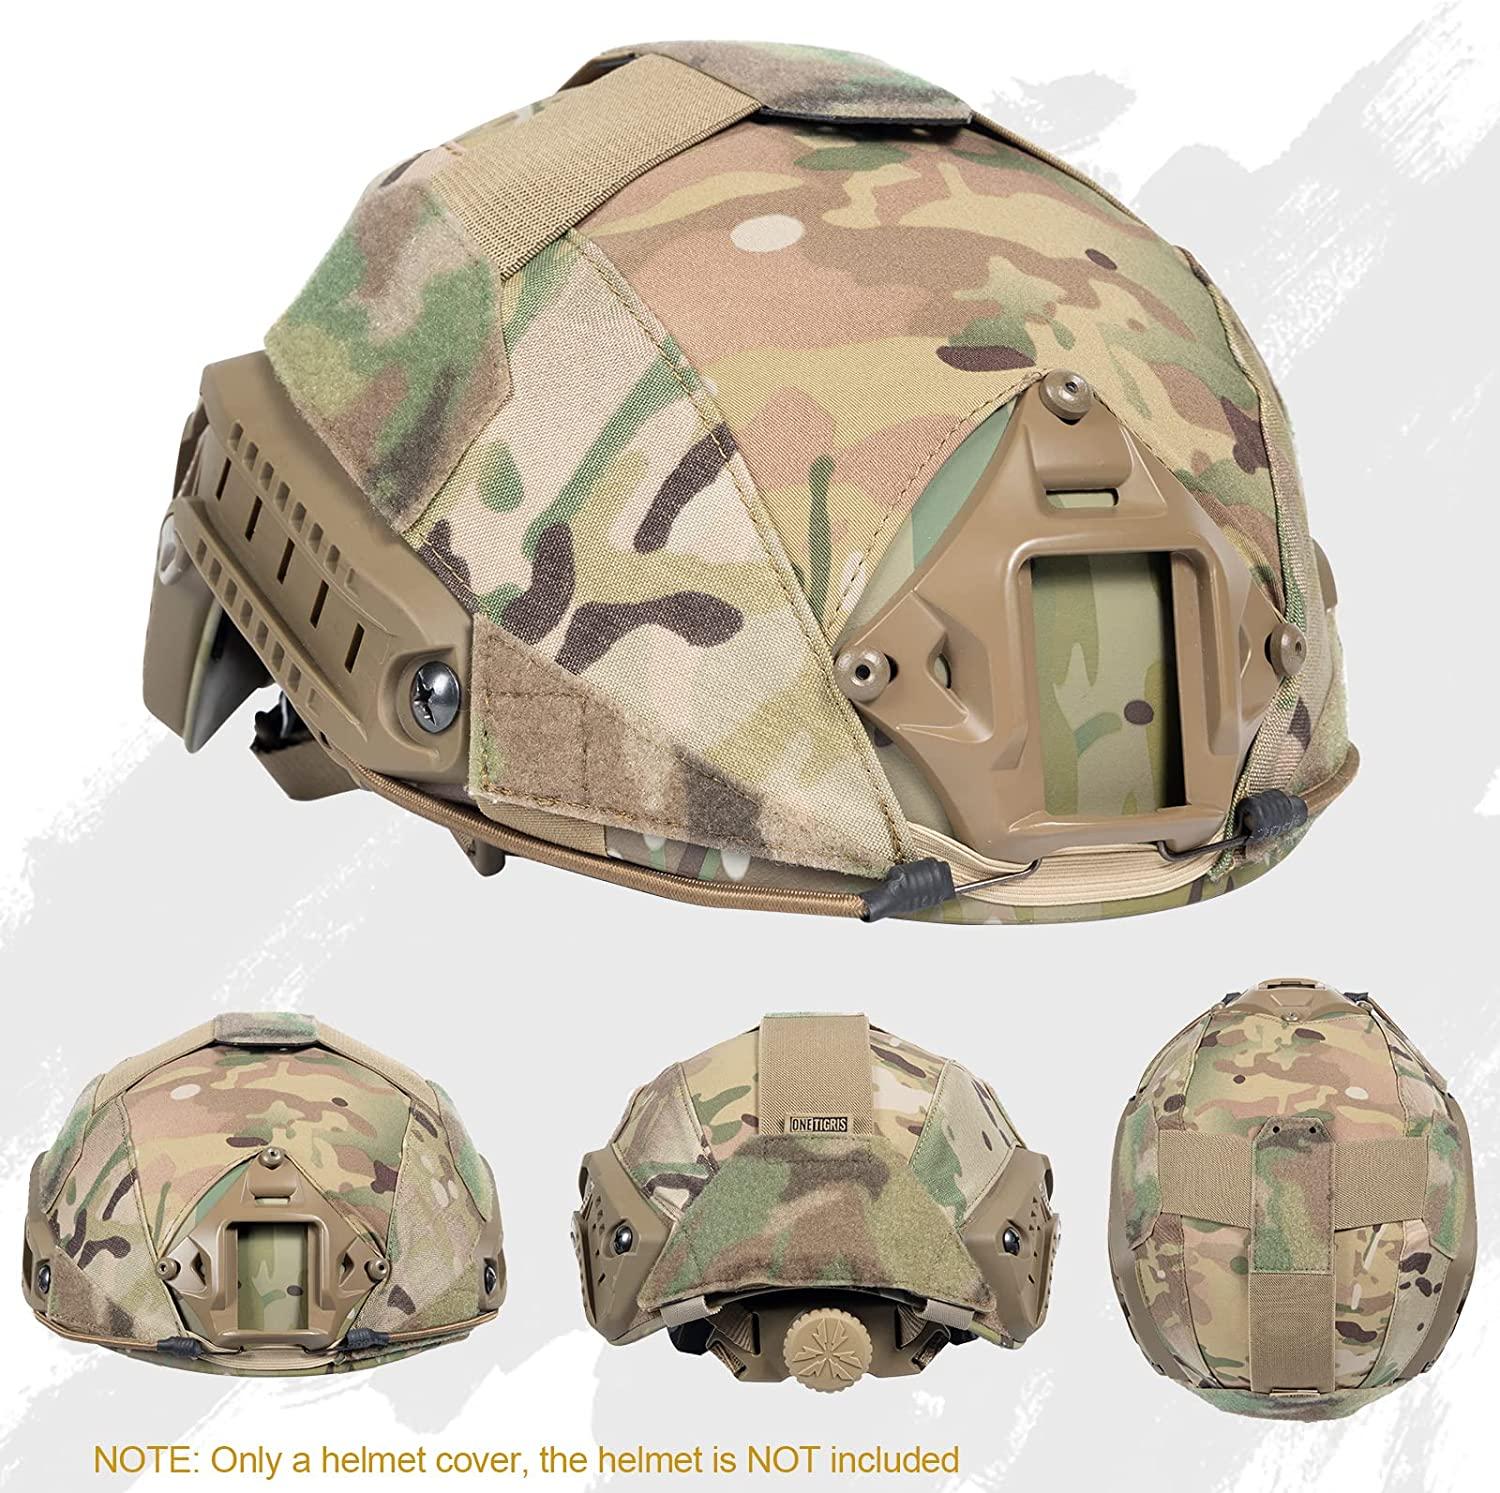 OneTigris Tactical Helmet Cover ZKB09, Camouflage Accessories for 